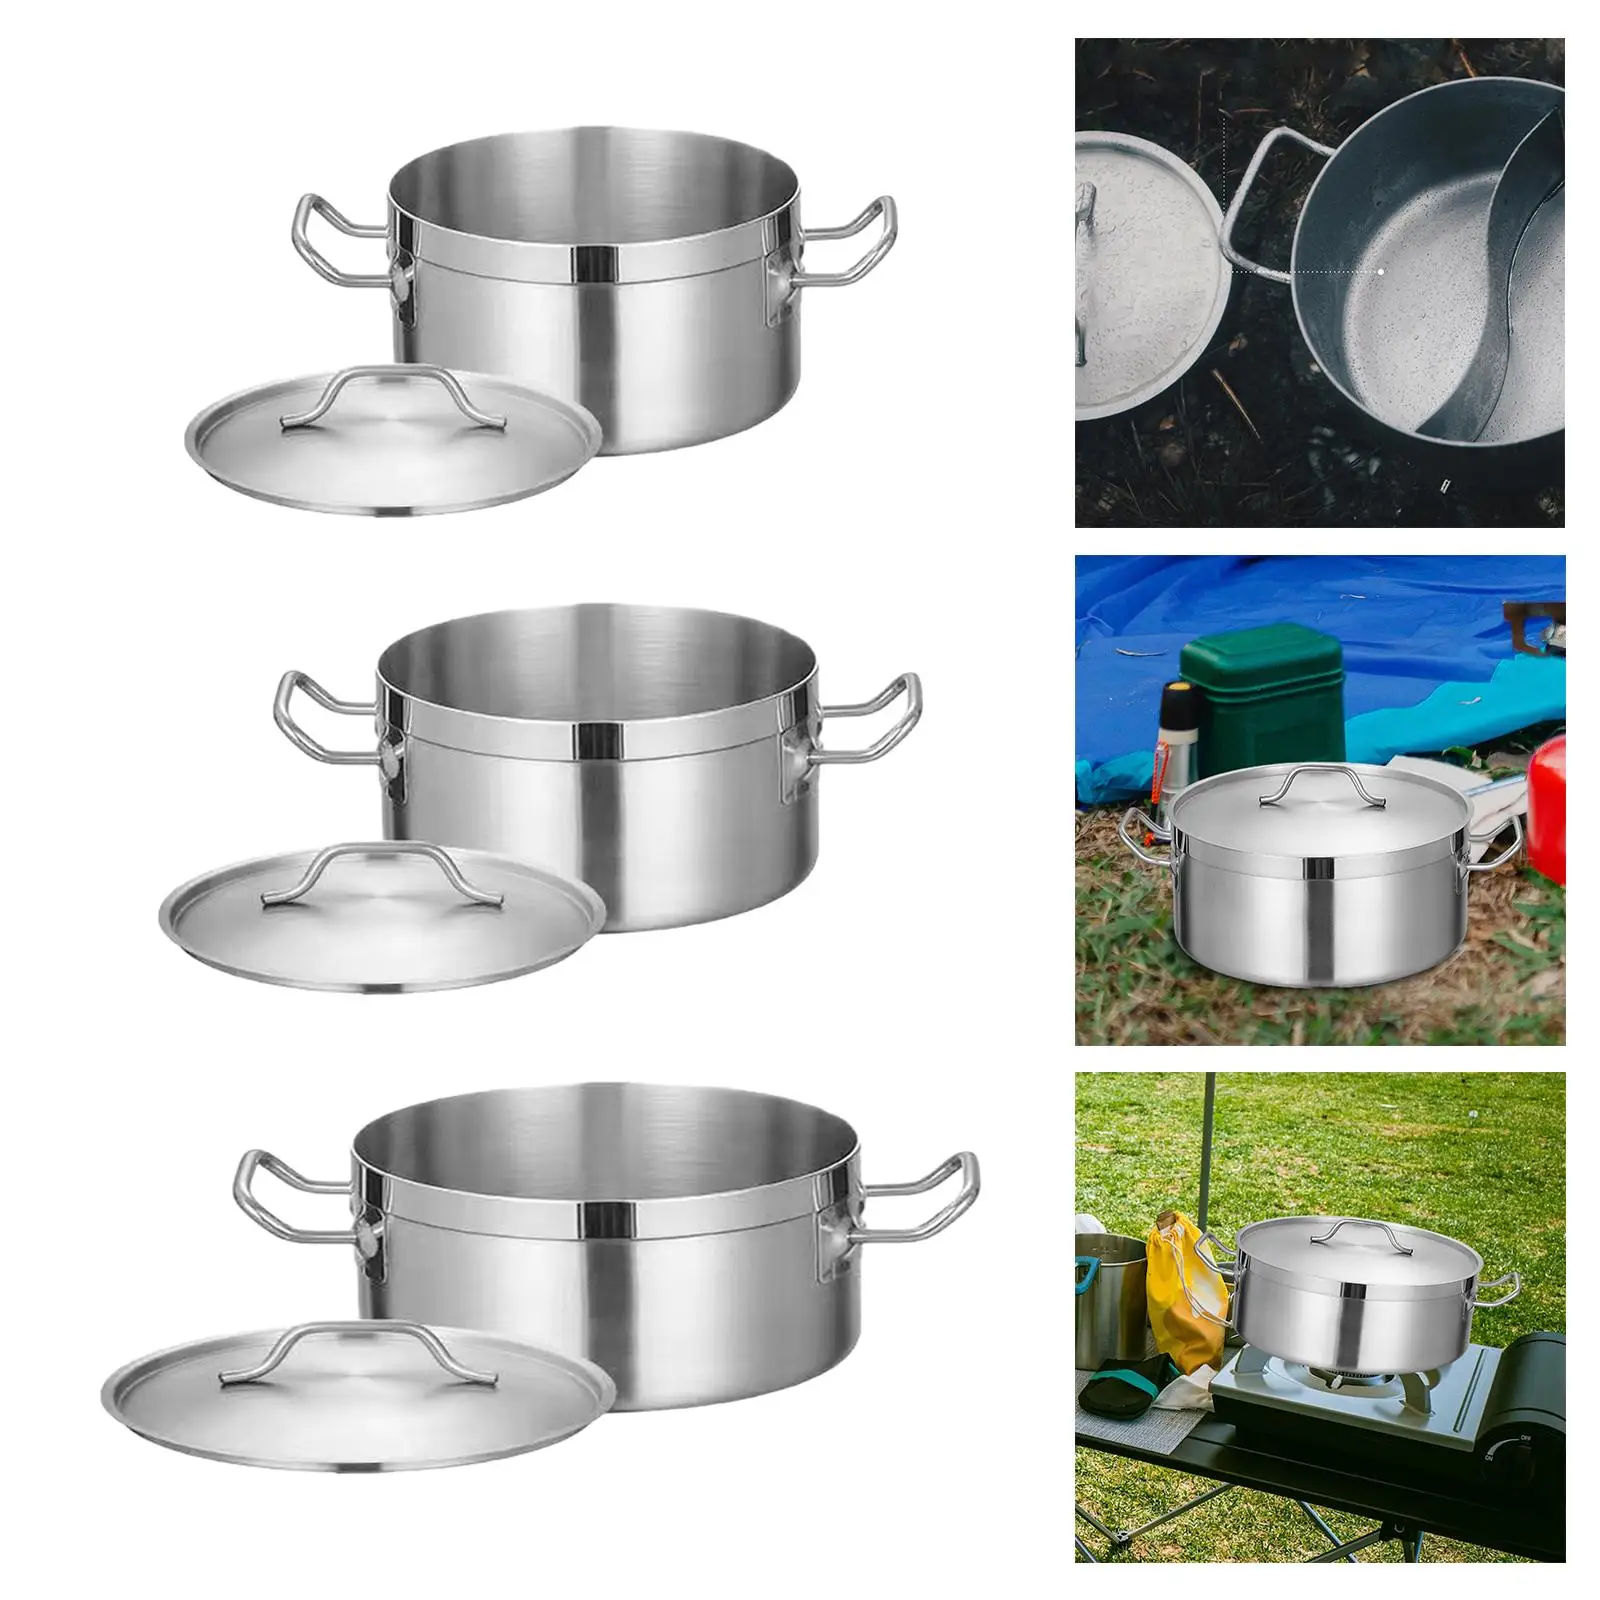 Stainless Steel Stockpot Cookware Casserole Pot Heavy Duty Induction Stockpot for Kitchen Outdoor Camping Household Commercial